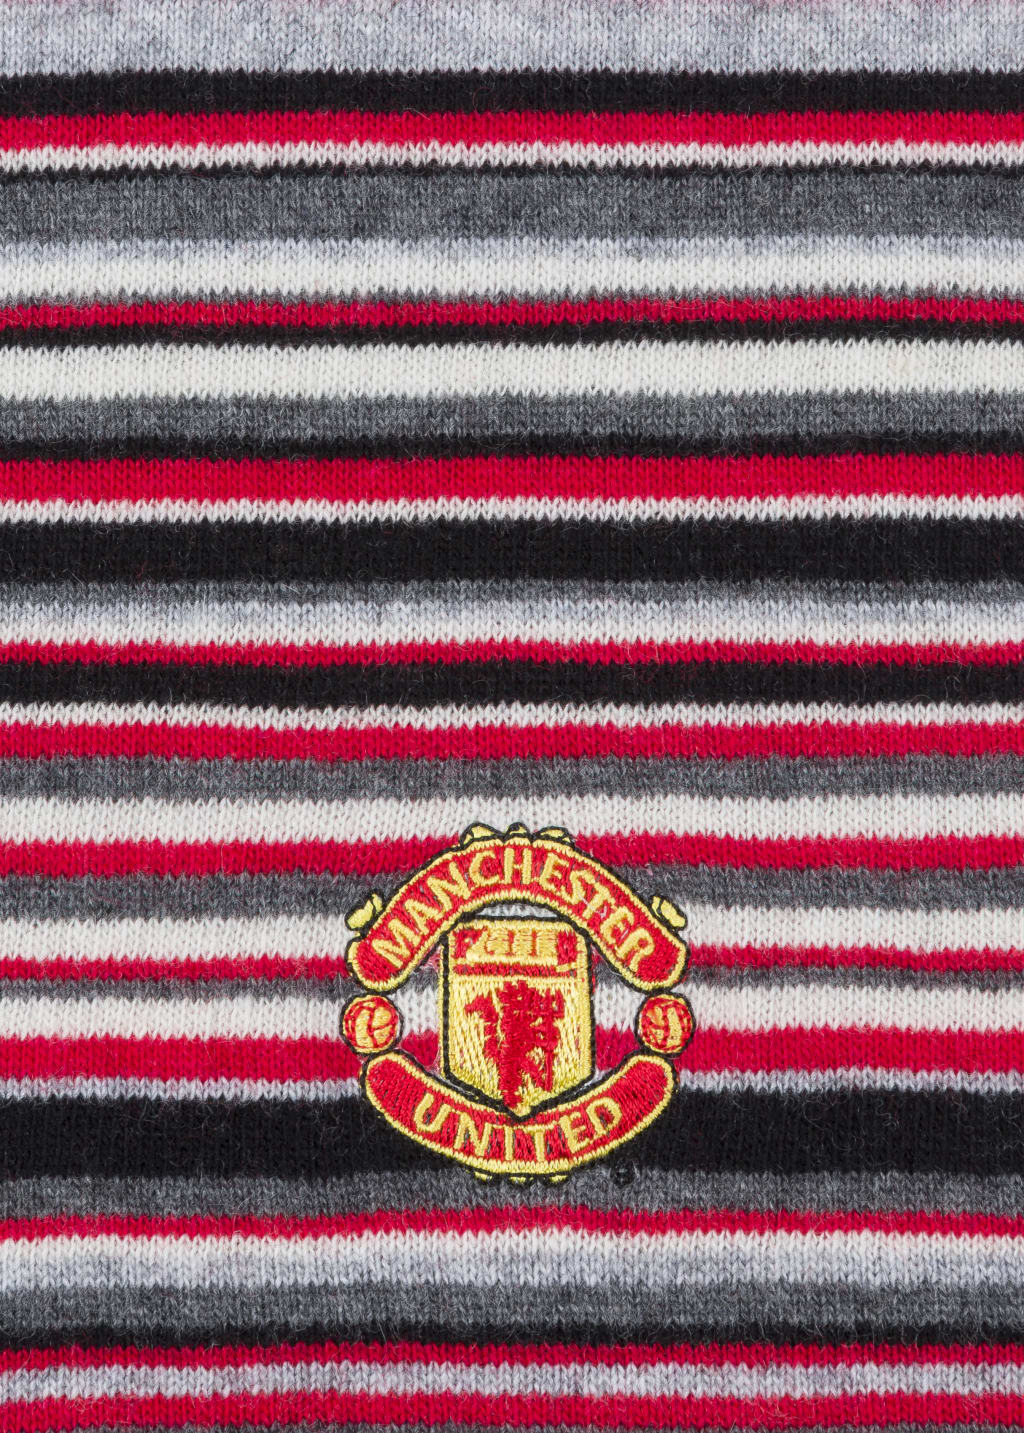 Detail View - Paul Smith & Manchester United – Red Striped Wool-Cashmere Scarf Paul Smith